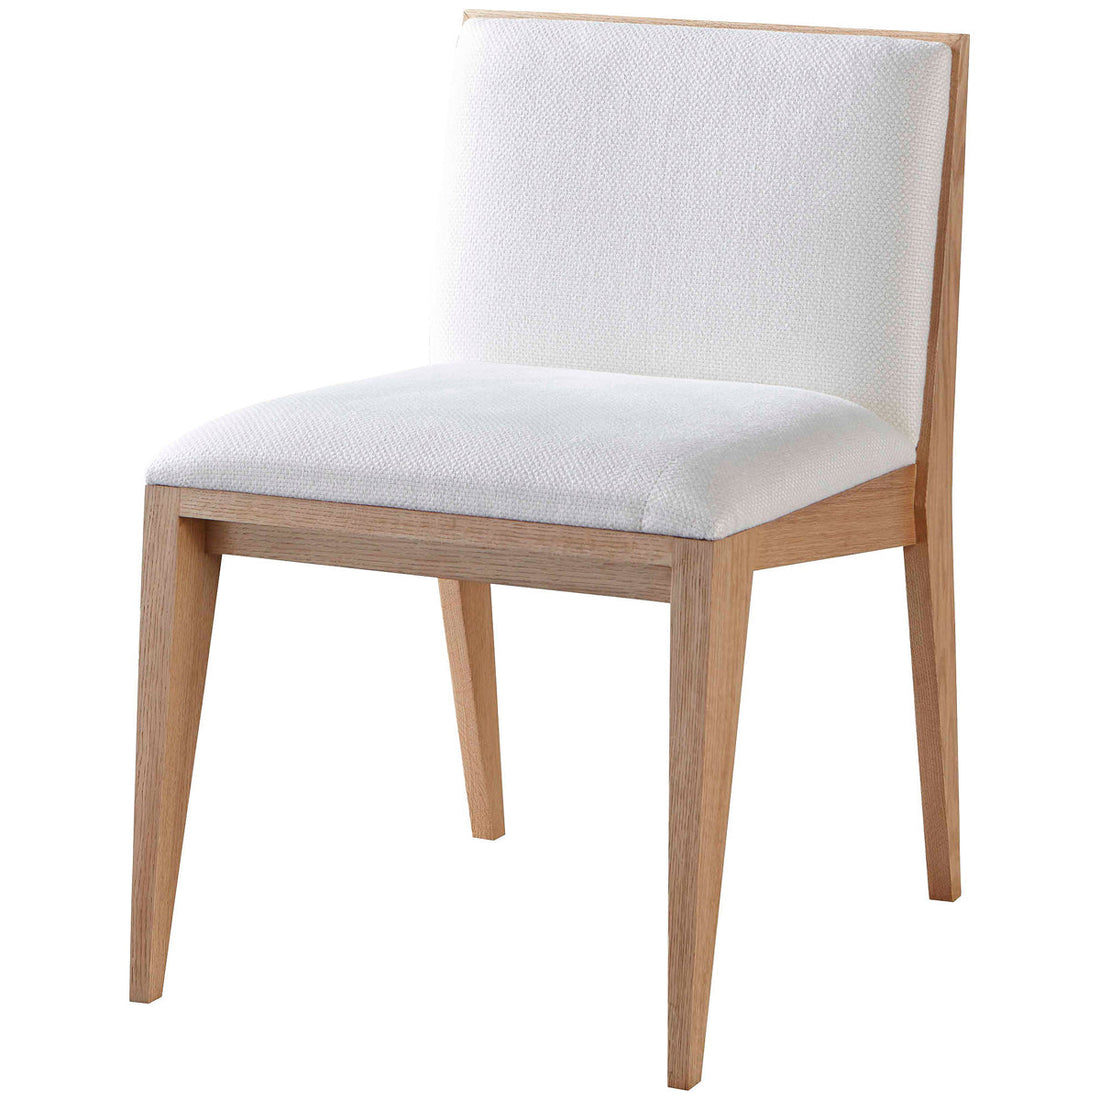 Baker Furniture Tresser Dining Chair with Fully Upholstered MCM150